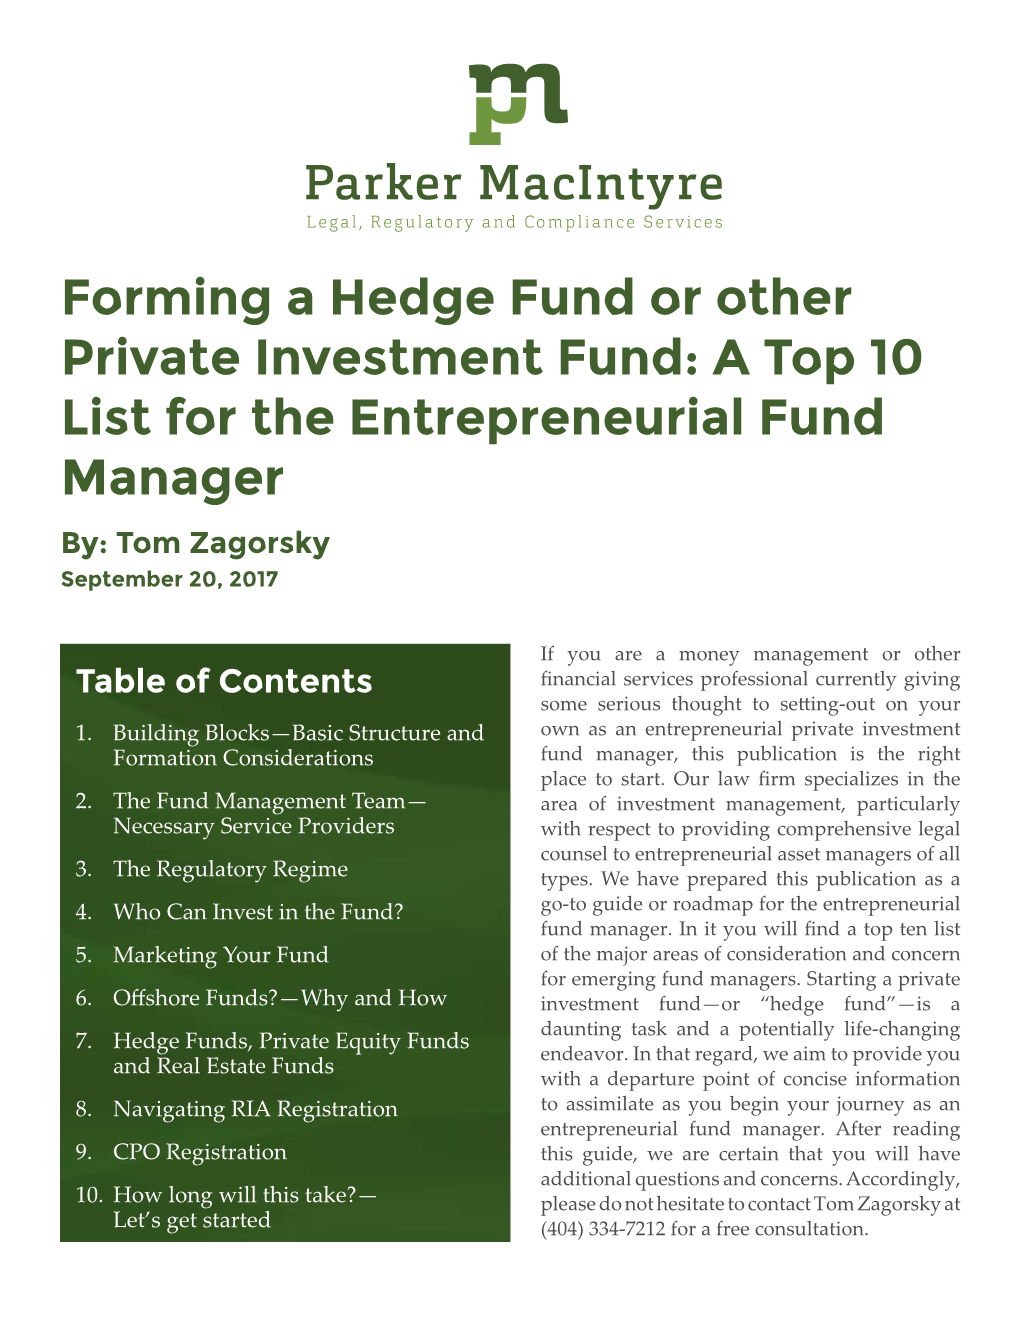 Forming a Hedge Fund Or Other Private Investment Fund: a Top 10 List for the Entrepreneurial Fund Manager By: Tom Zagorsky September 20, 2017